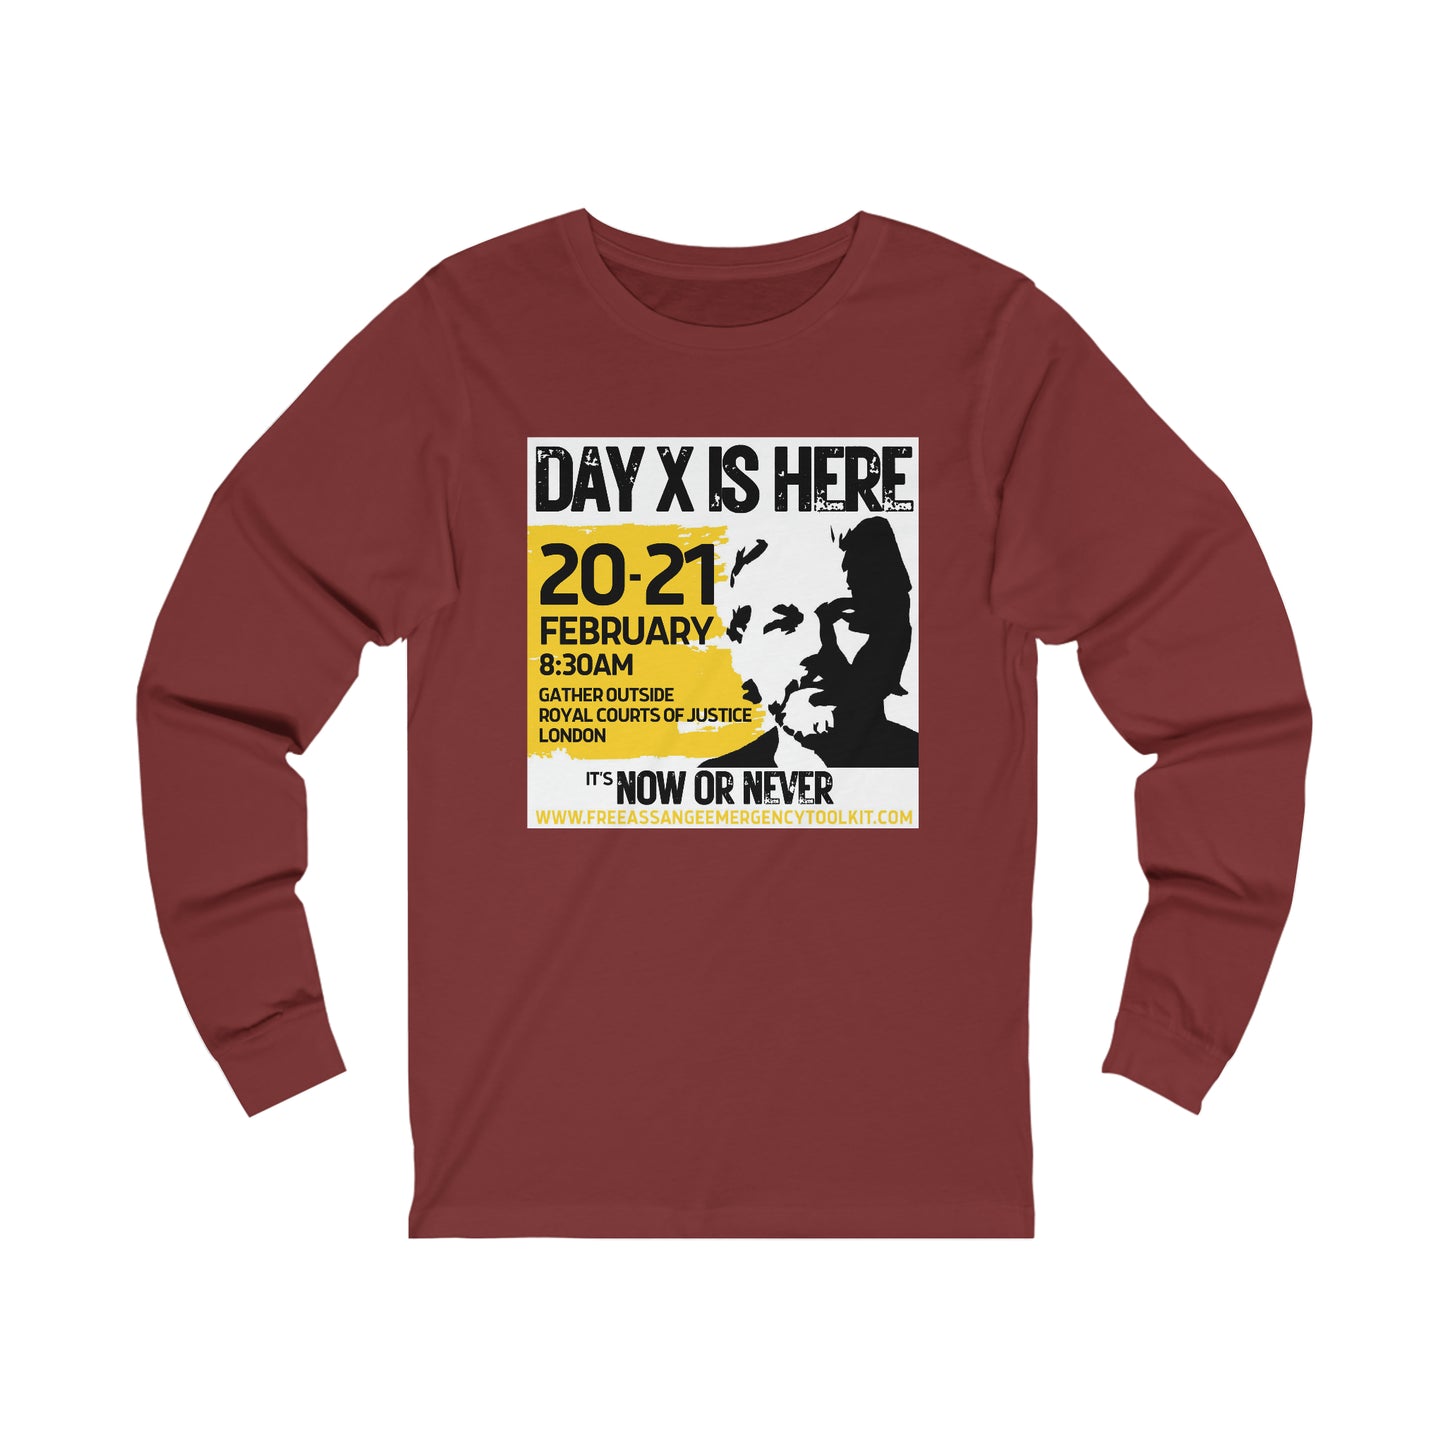 (UK) DAY X IS HERE Unisex Jersey Long Sleeve Tee